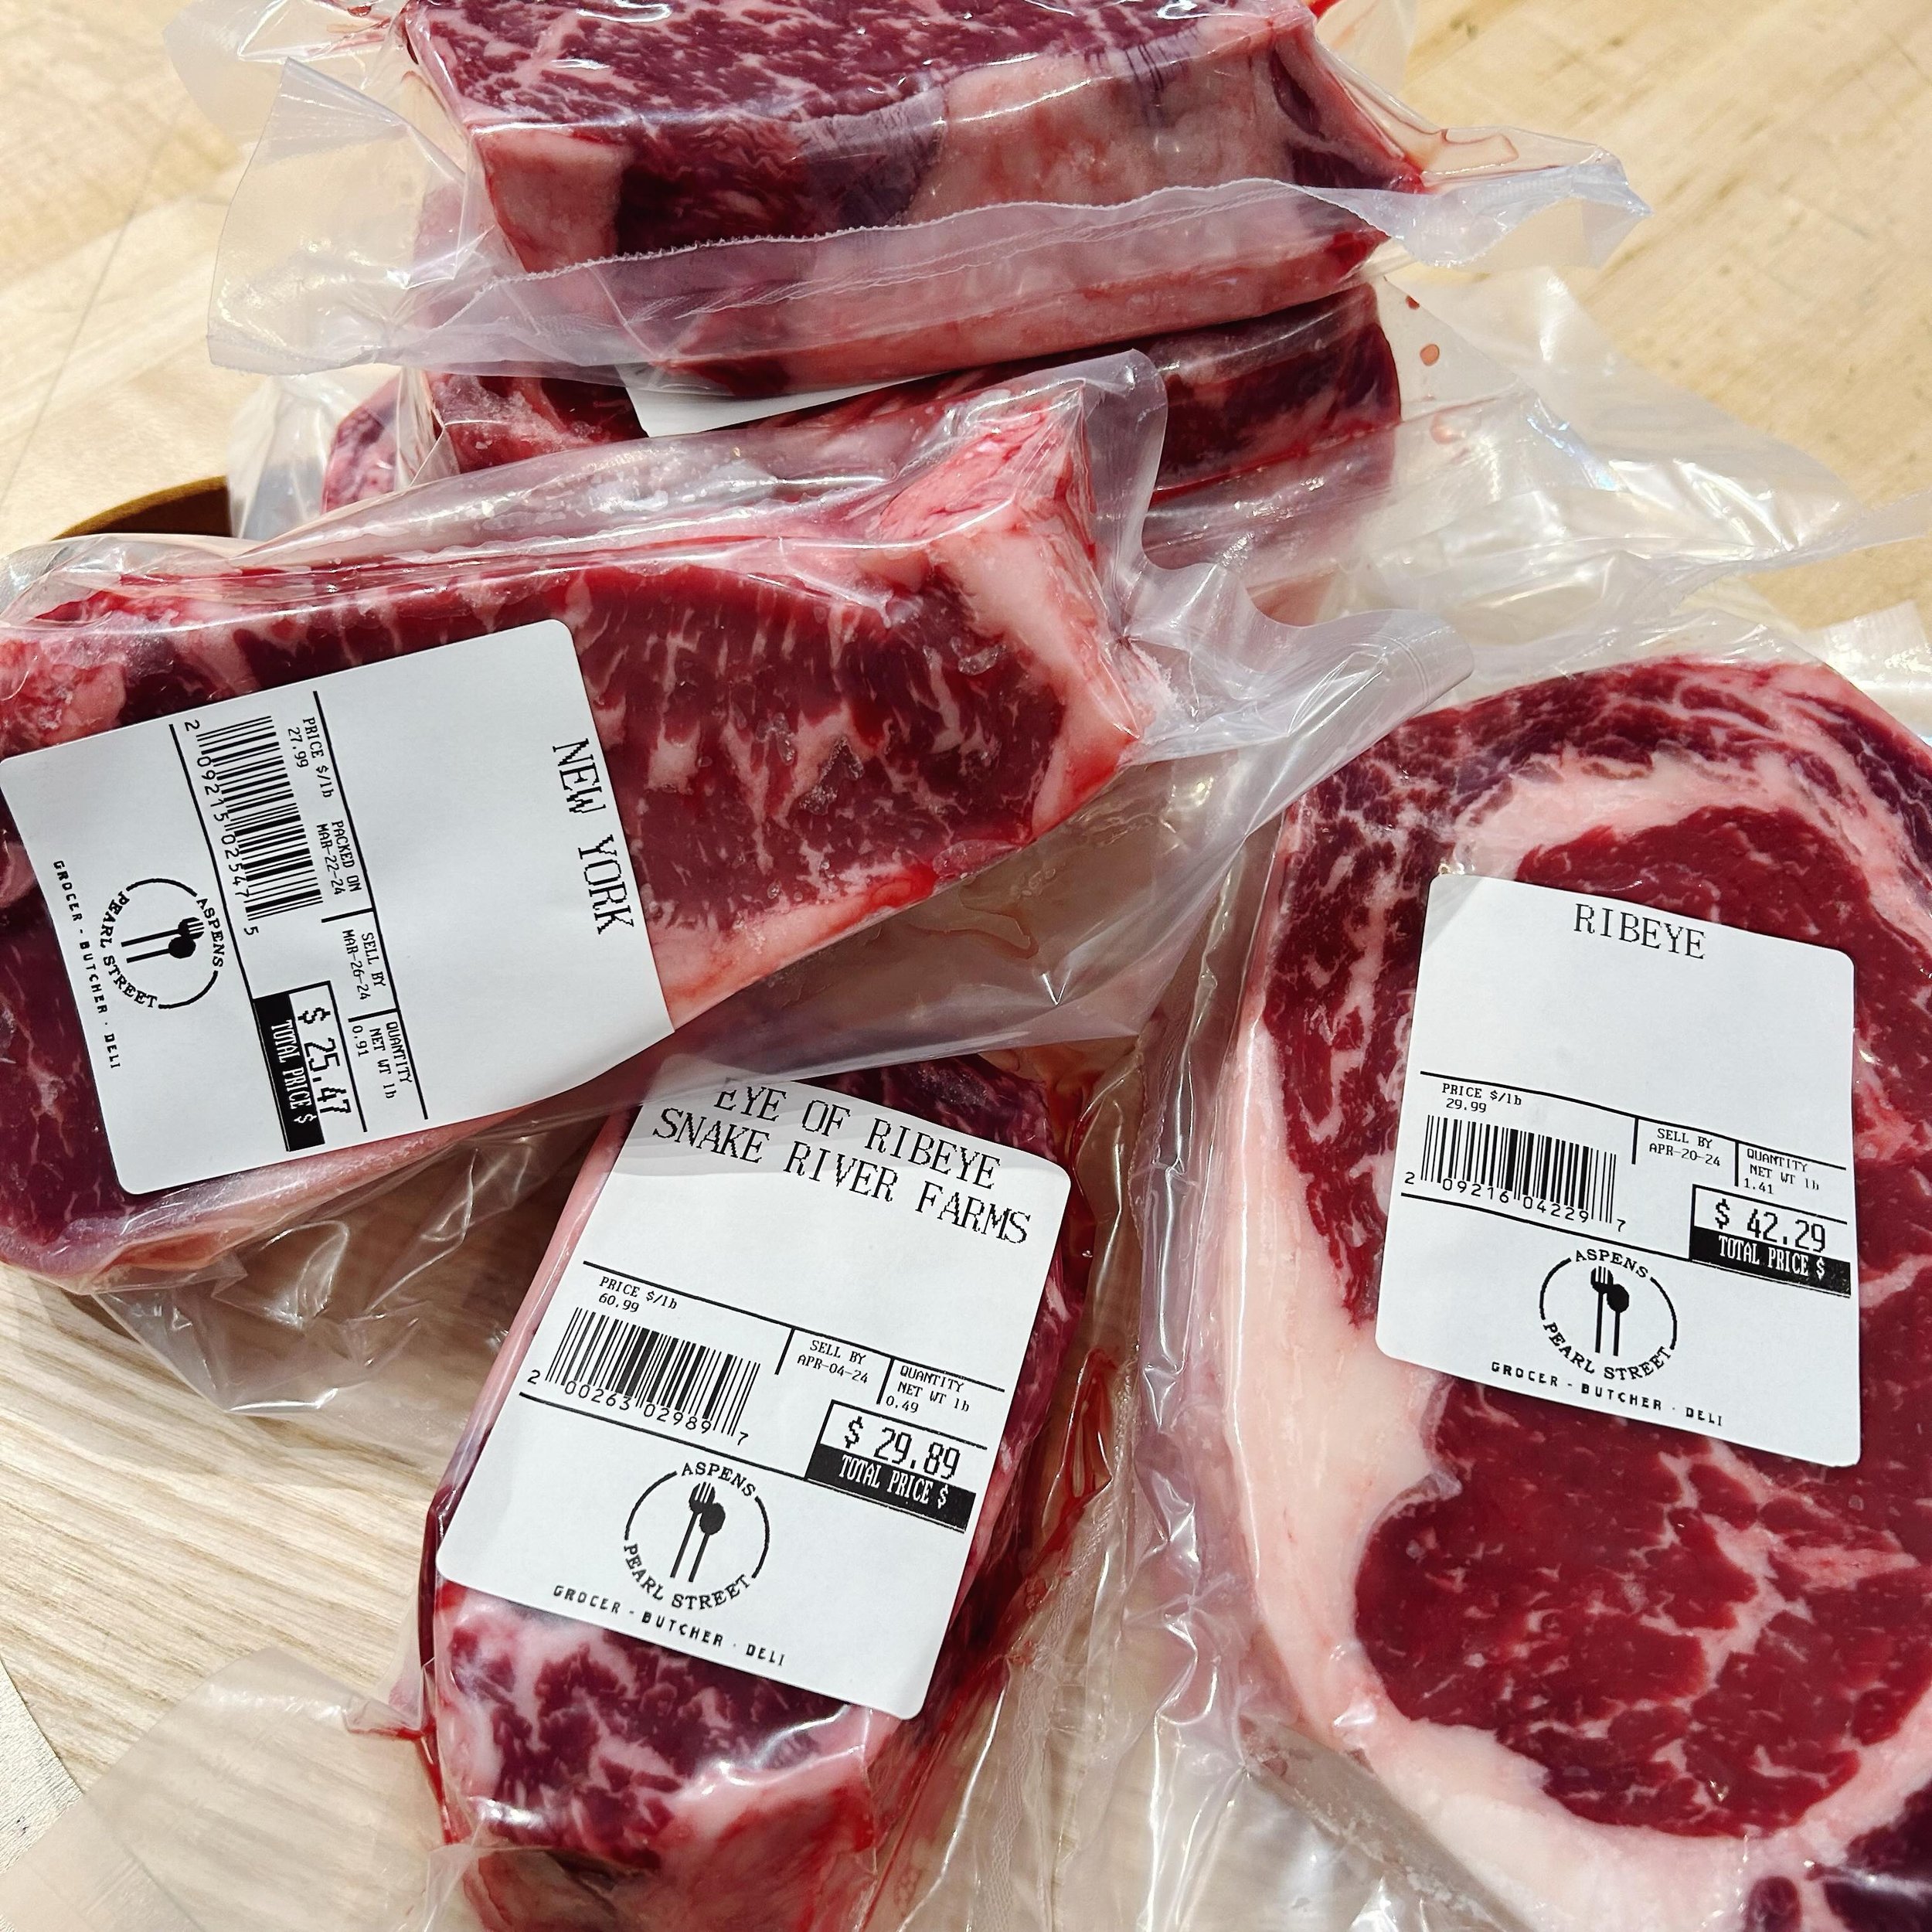 Sealed in freshness ✔️
Preserved flavors ✔️
Cryovac meats are now available across from the butcher case! We have all cuts of steak and chimichurri chicken breast ready to grab + go! 🥩🥩🥩